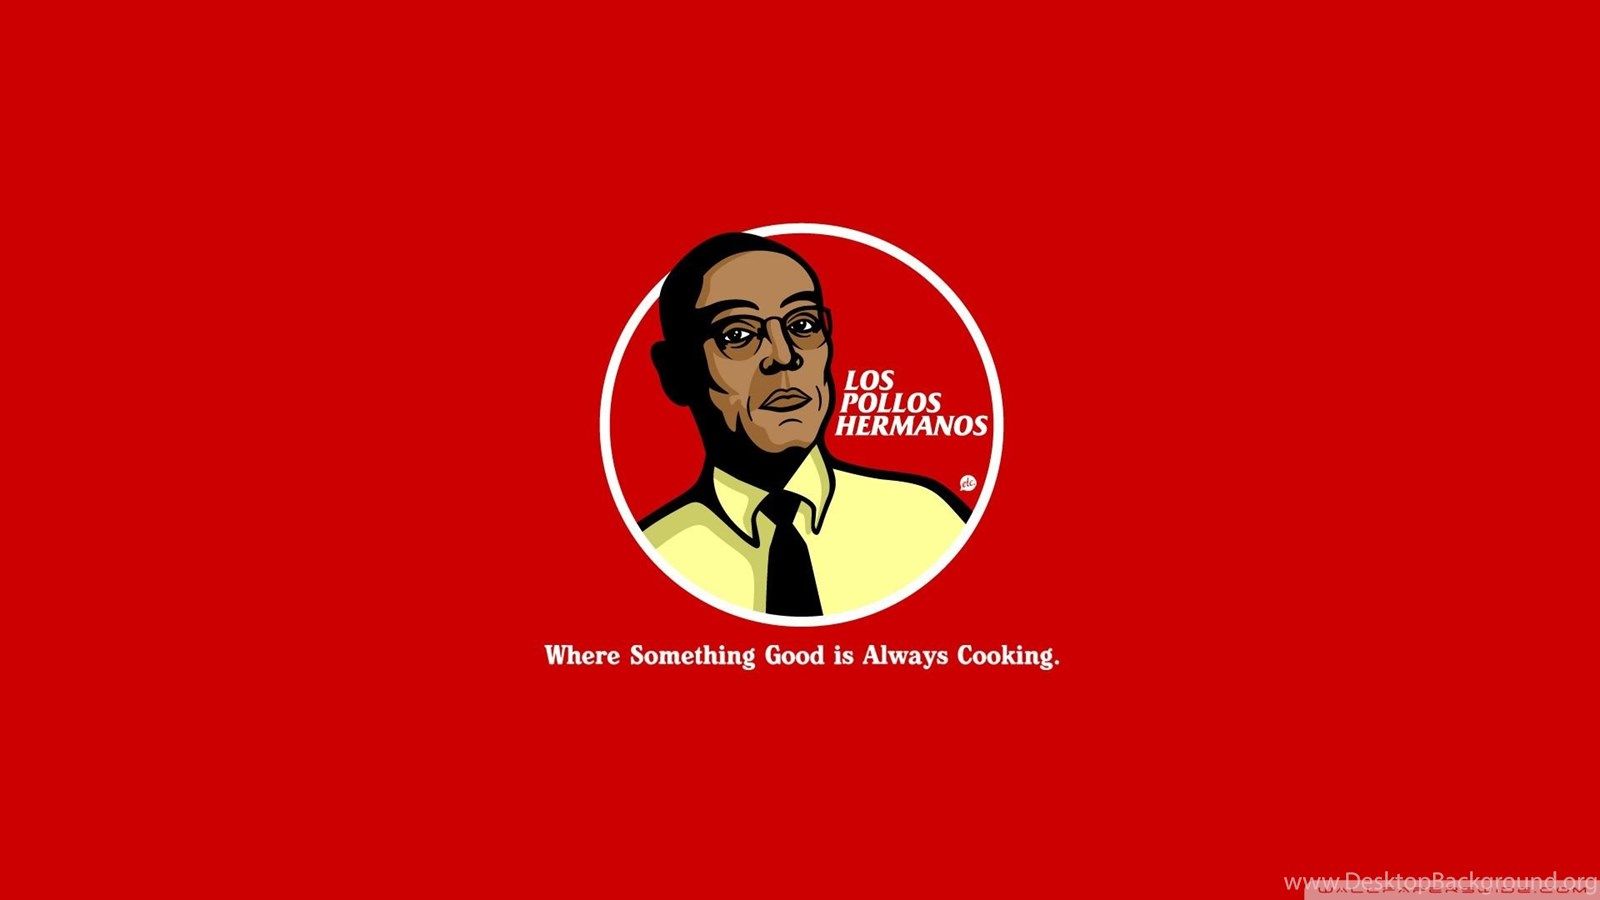 10 4K Gus Fring Wallpapers  Background Images